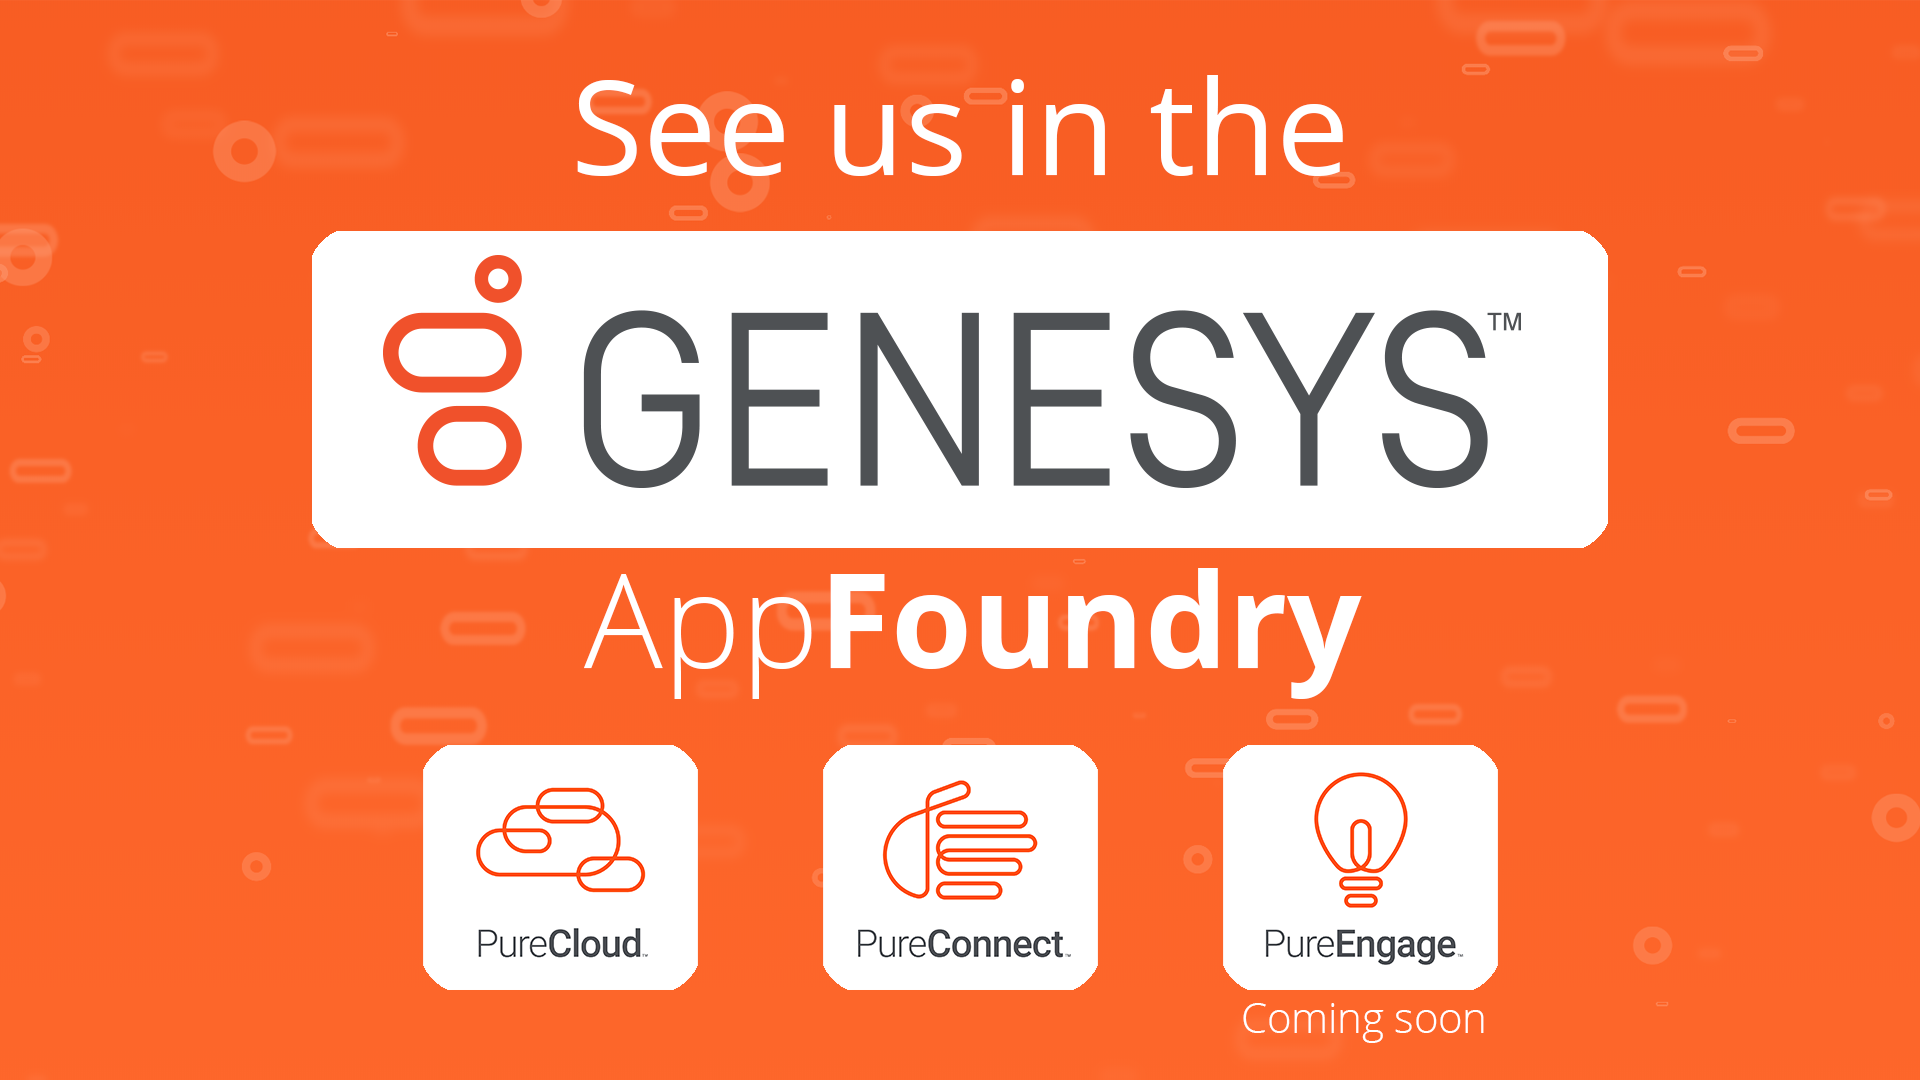 Genesys AppFoundry for PureCloud, PureConnect, and PureEngage